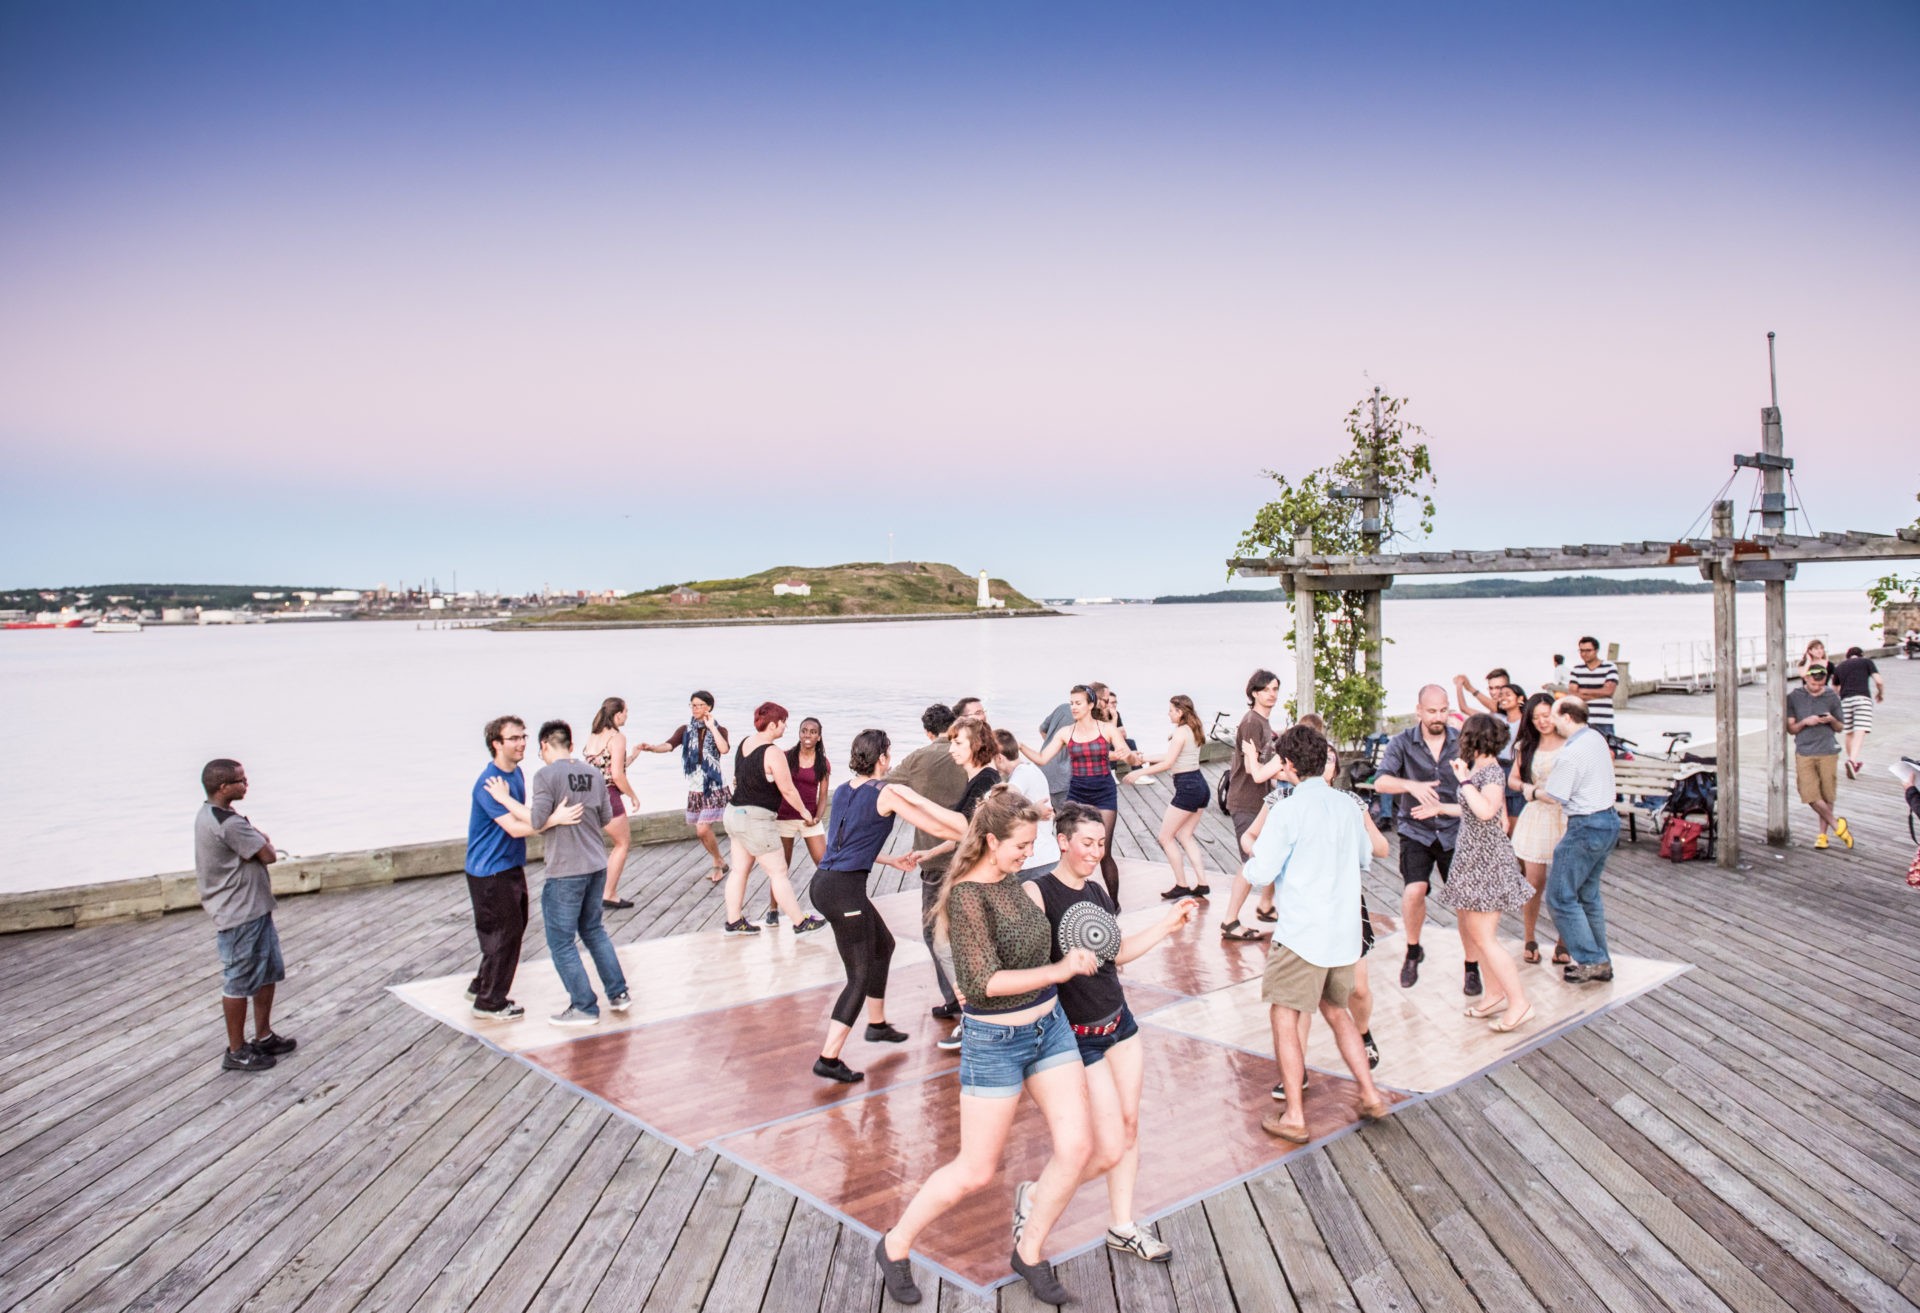 Develop Nova Scotia wants you to host your next event on the Halifax or Lunenburg waterfront!